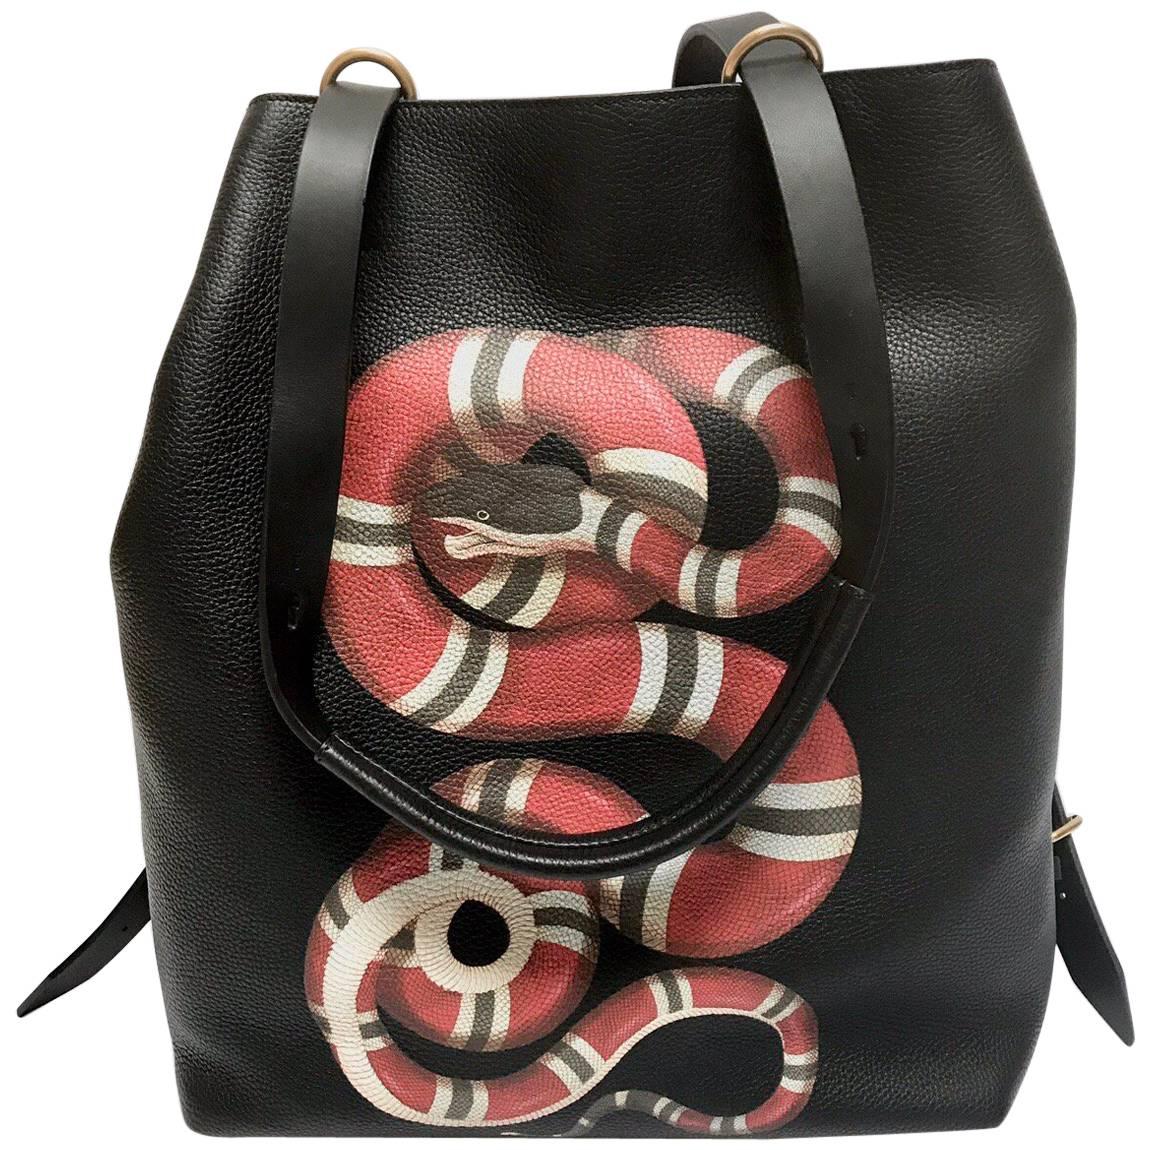 Gucci Backpack for Men's in Black Leather with Red Serpent 2017